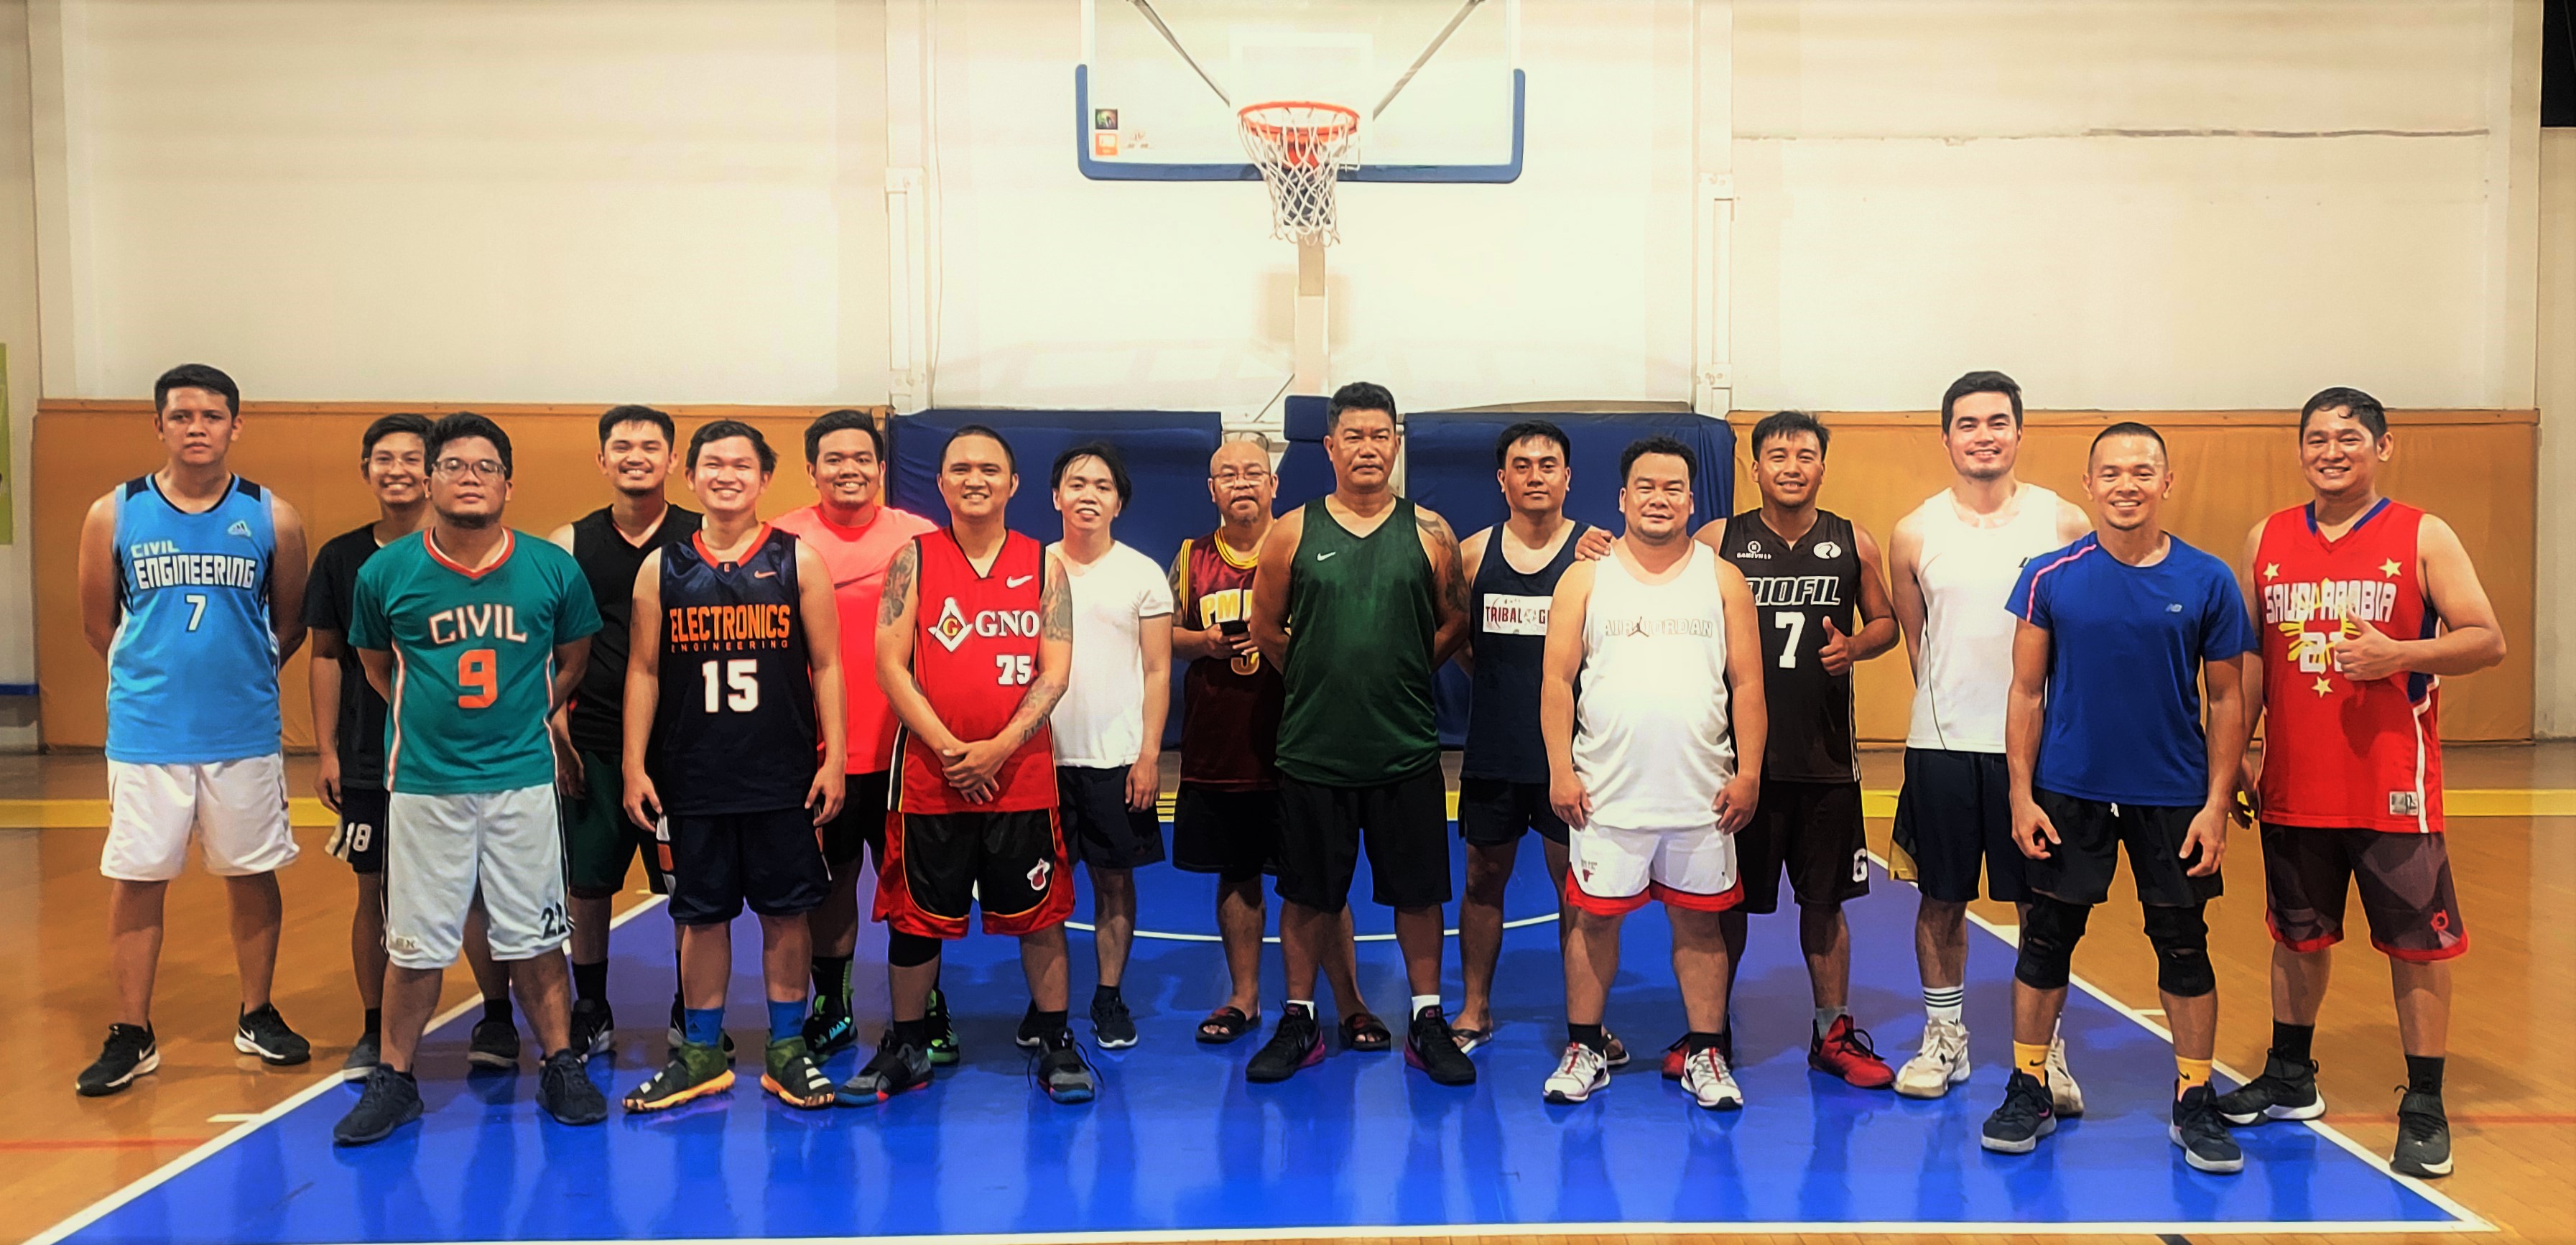 <CORPORATE WELLNESS> WARM UP THROUGH A FRIENDLY BASKETBALL GAME AFTER 2 YEARS